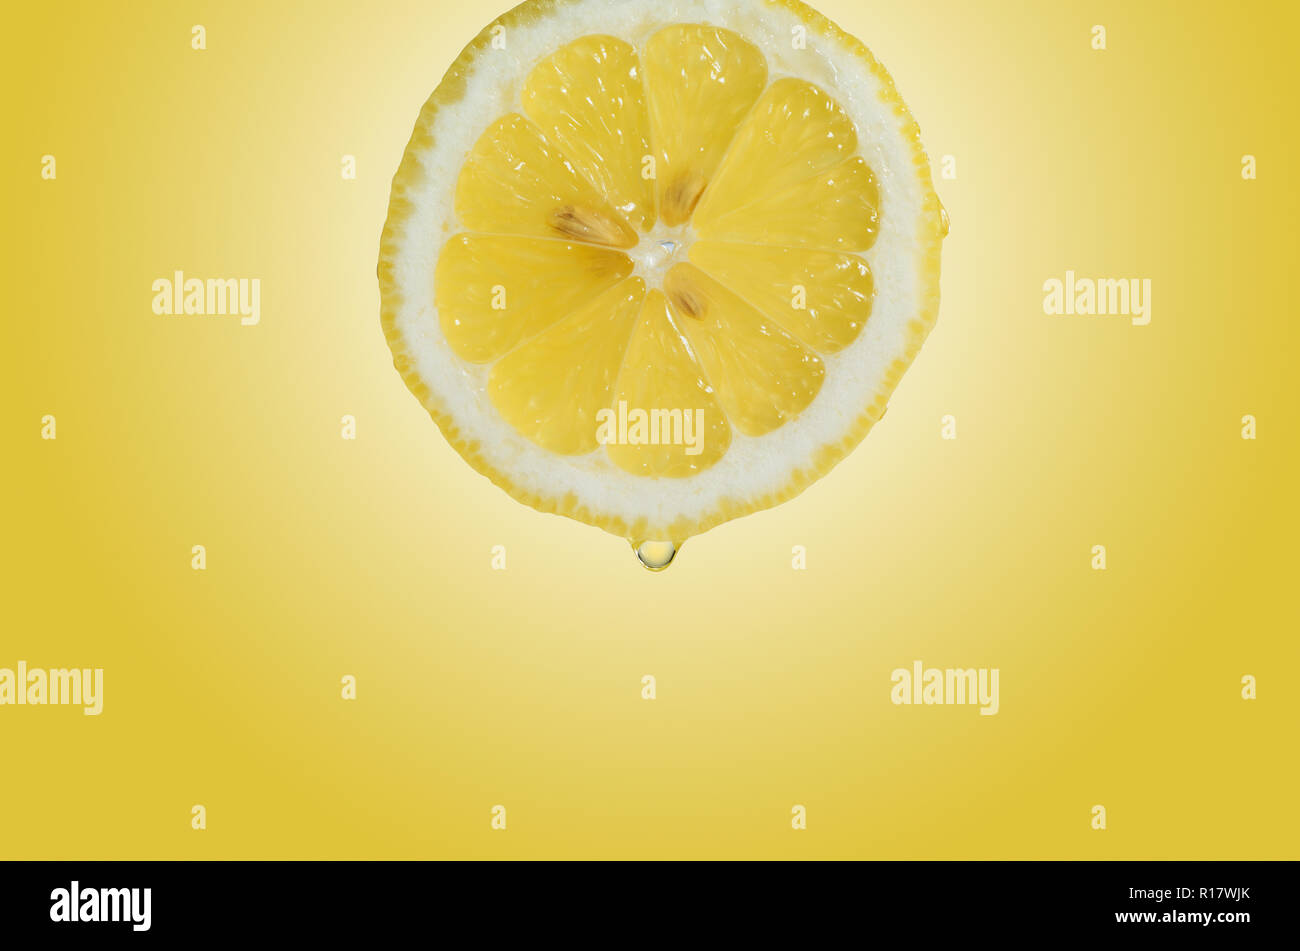 Close up view of lemon slice with droplet of juice, yellow background Stock Photo